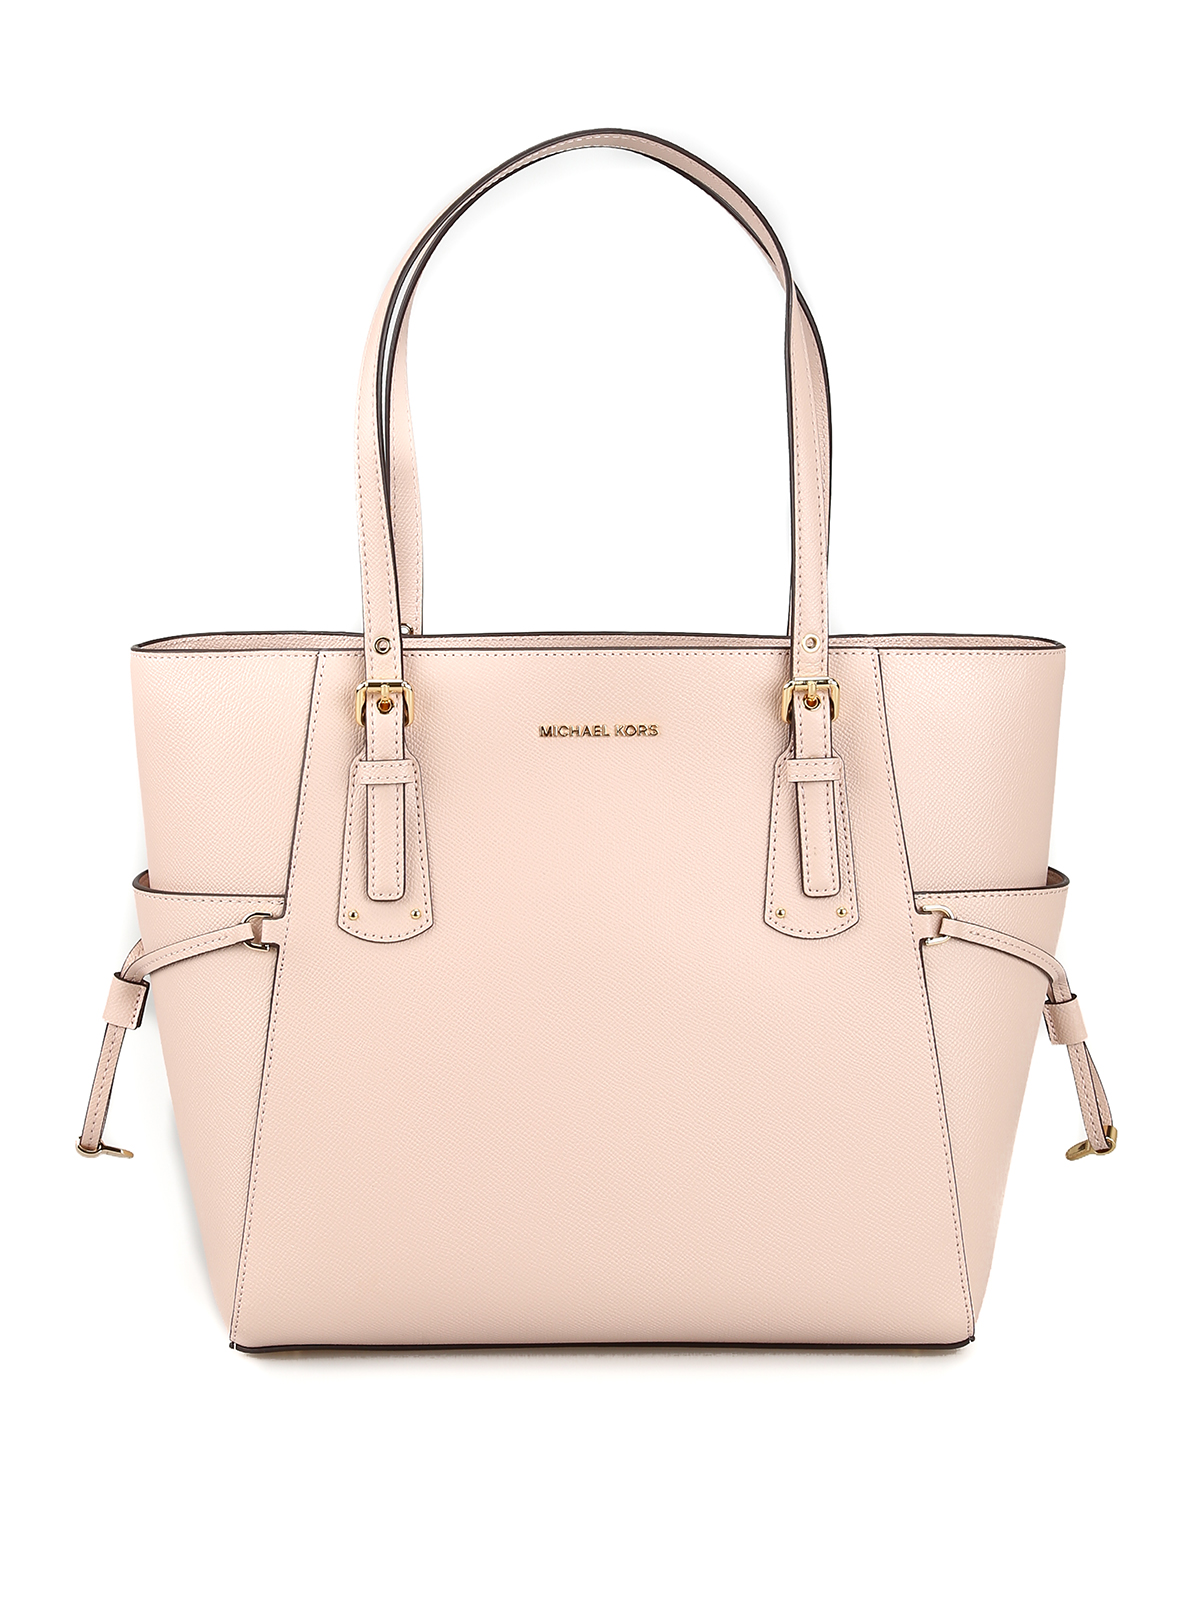 Totes bags Michael Kors - Voyager S light pink leather tote bag -  30H7GV6T9L187